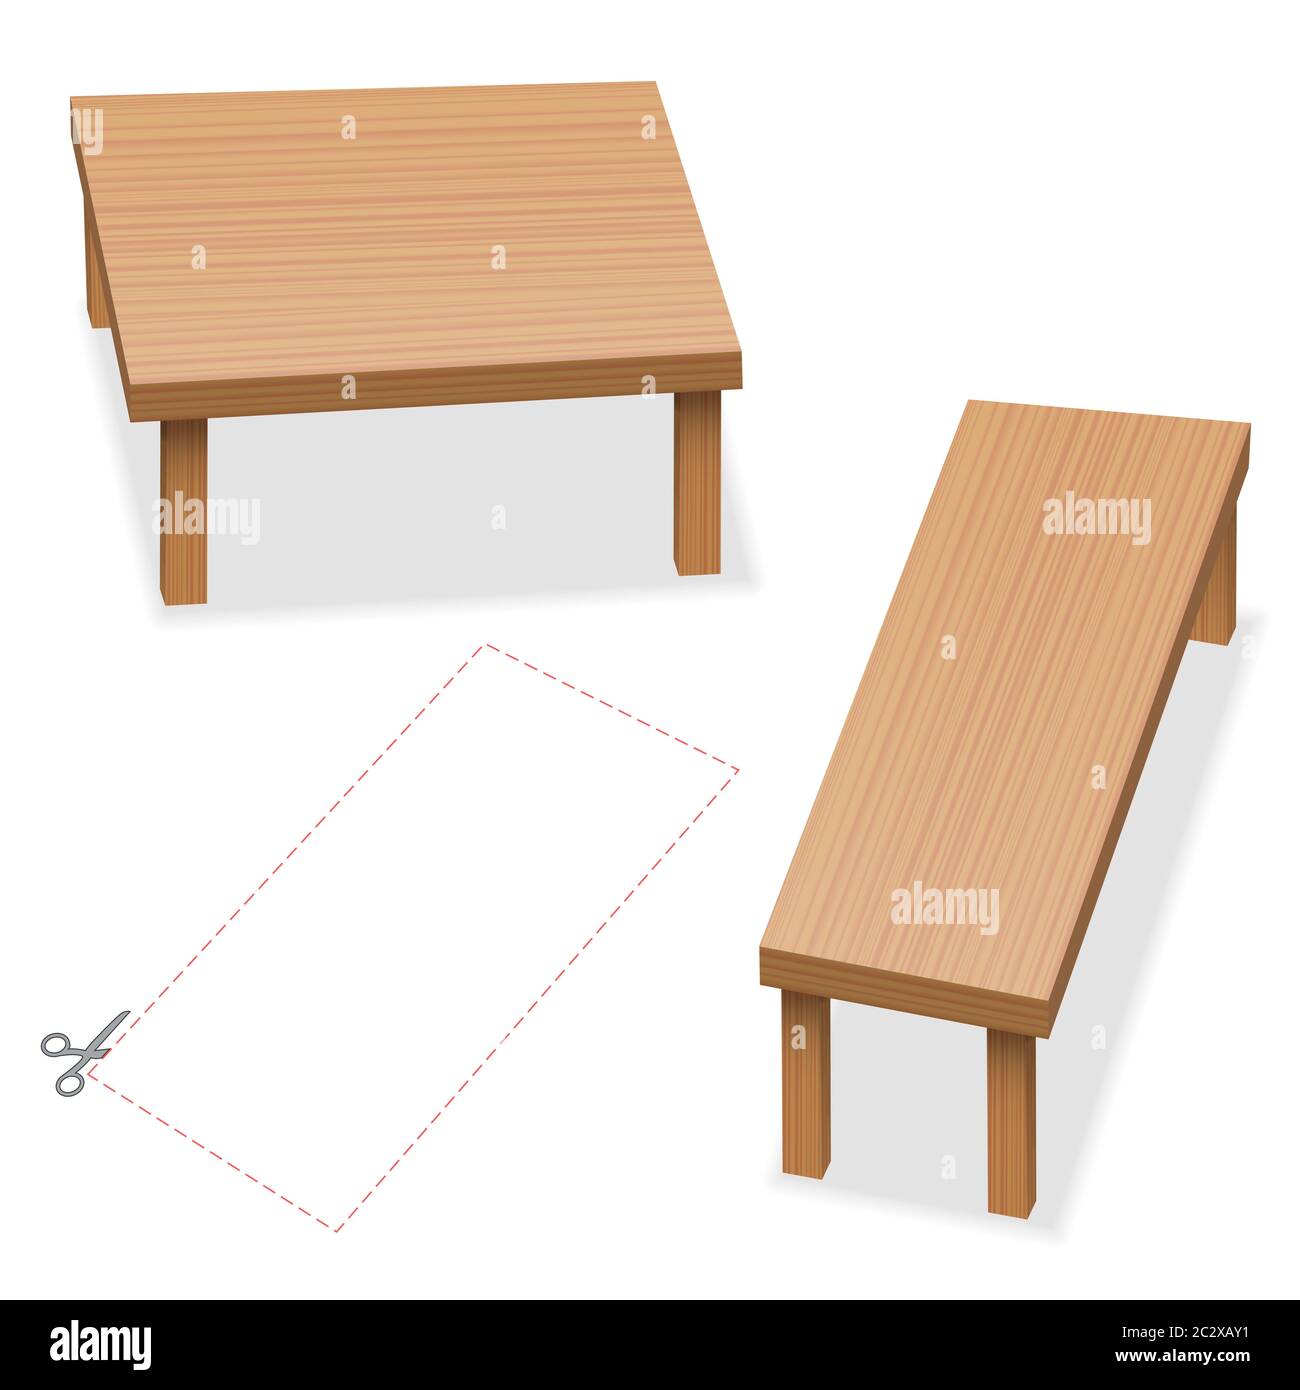 Optical illusion, two tables with same size of tabletop. Cut out the red rectangle, compare, check and wonder - illustration on white background. Stock Photo